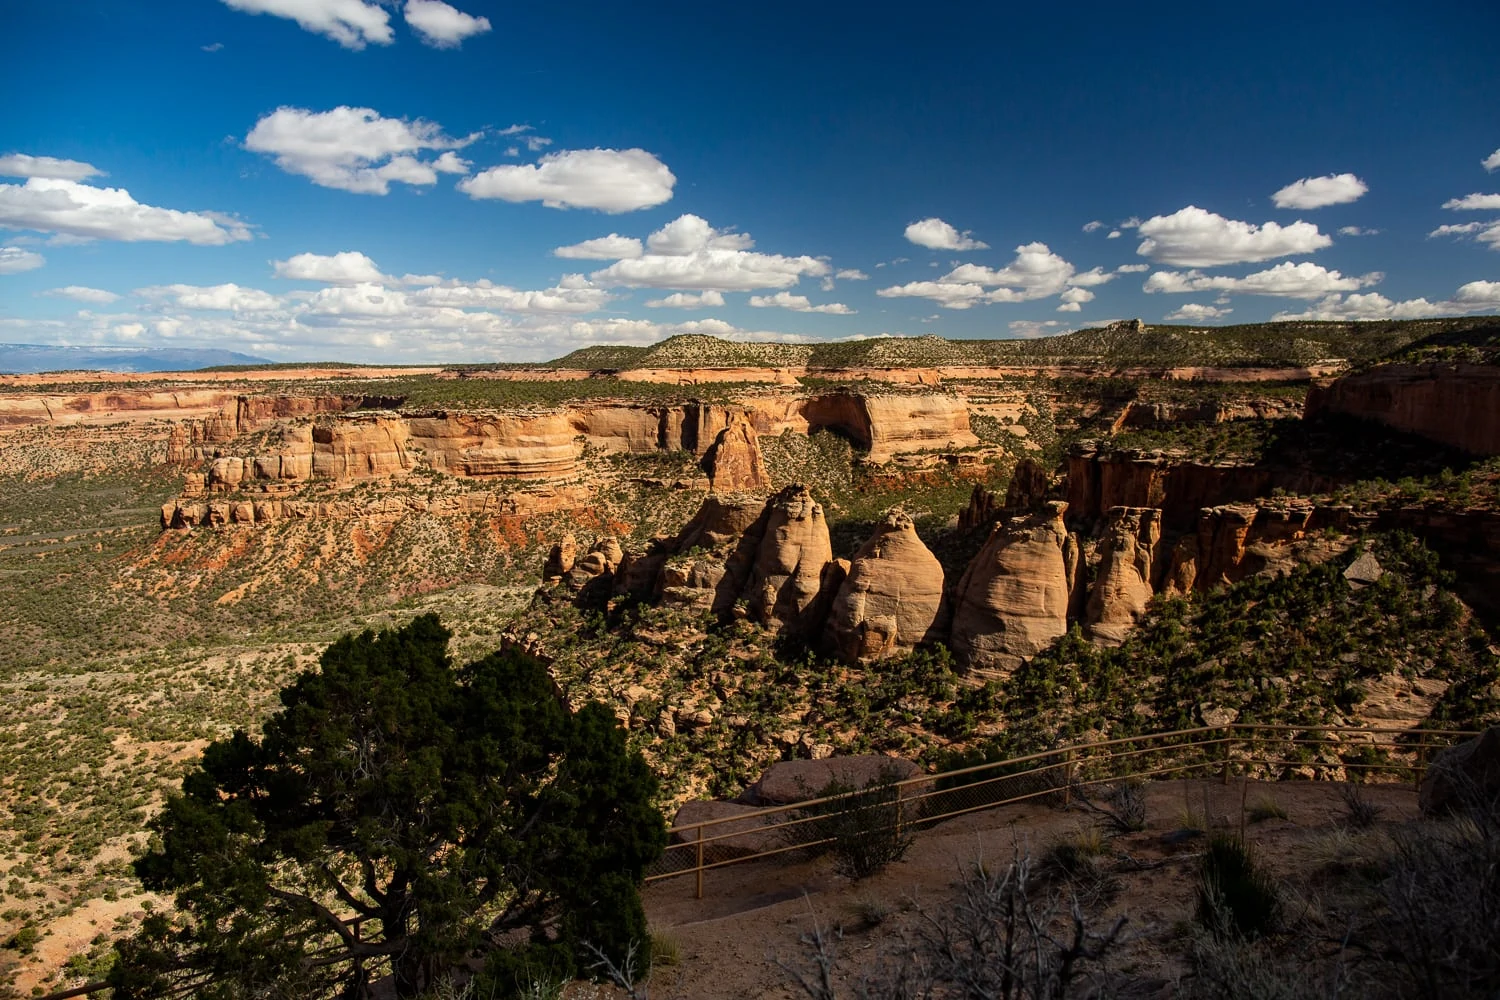 Blue sky over the red canyon of Colorado National Monument with the Coke Ovens rock formations in the foreground.